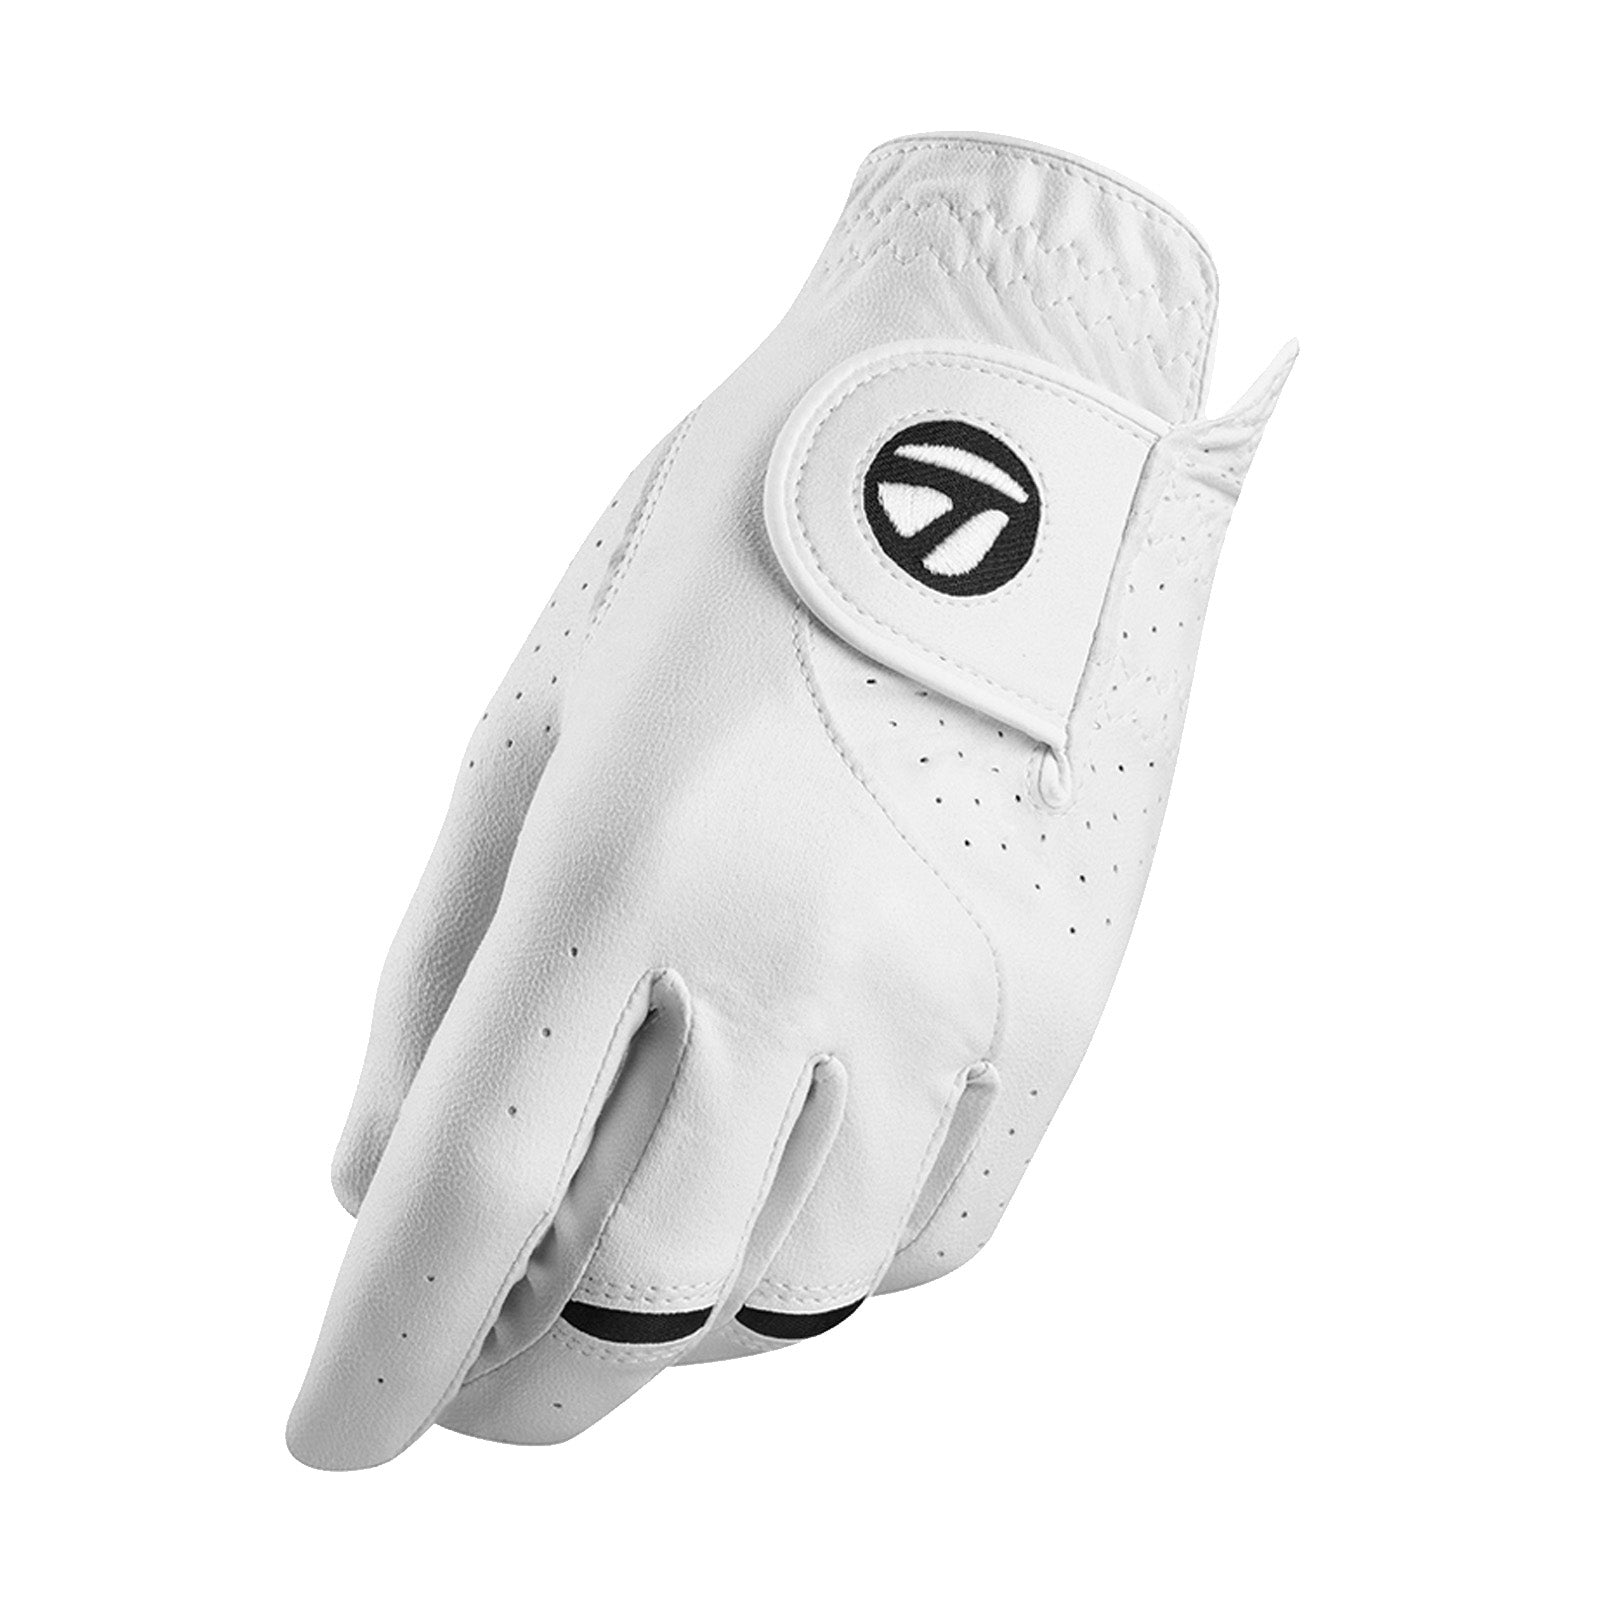 TaylorMade Ladies Stratus Tech RIGHT Hand Golf Glove